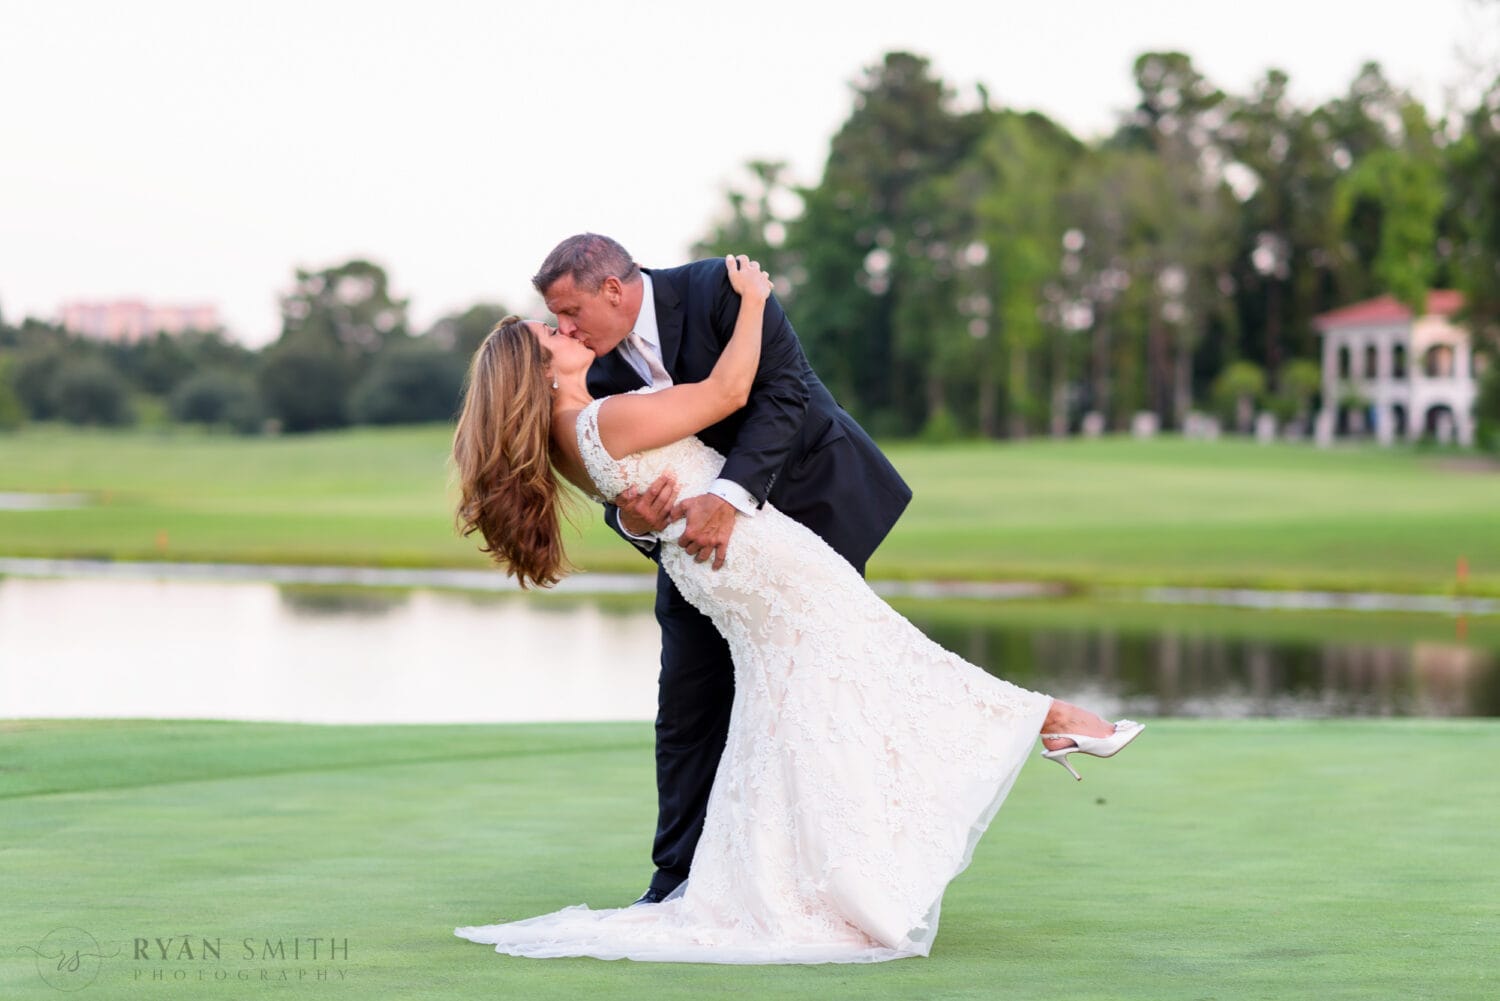 Groom dipping back bride for a kiss on the golf course - Members Club at Grande Dunes